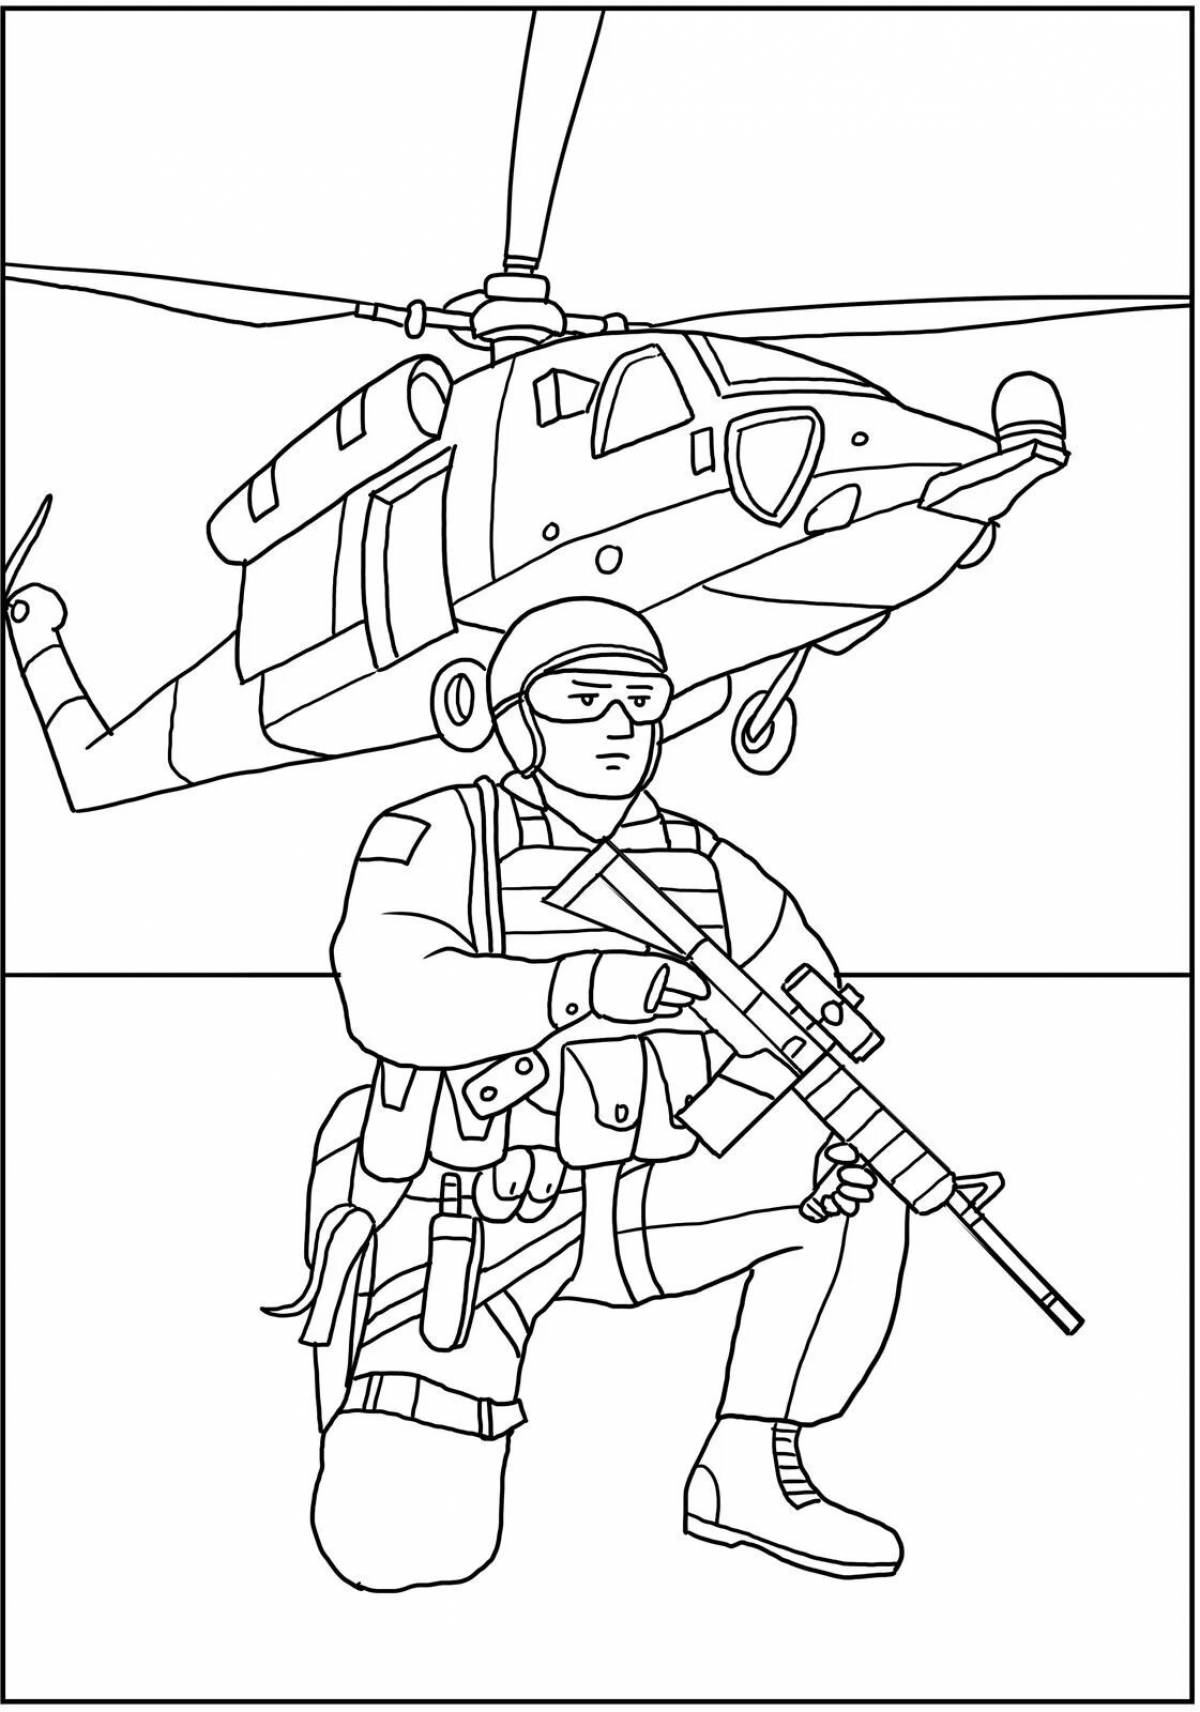 Coloring page glamorous Russian army soldiers